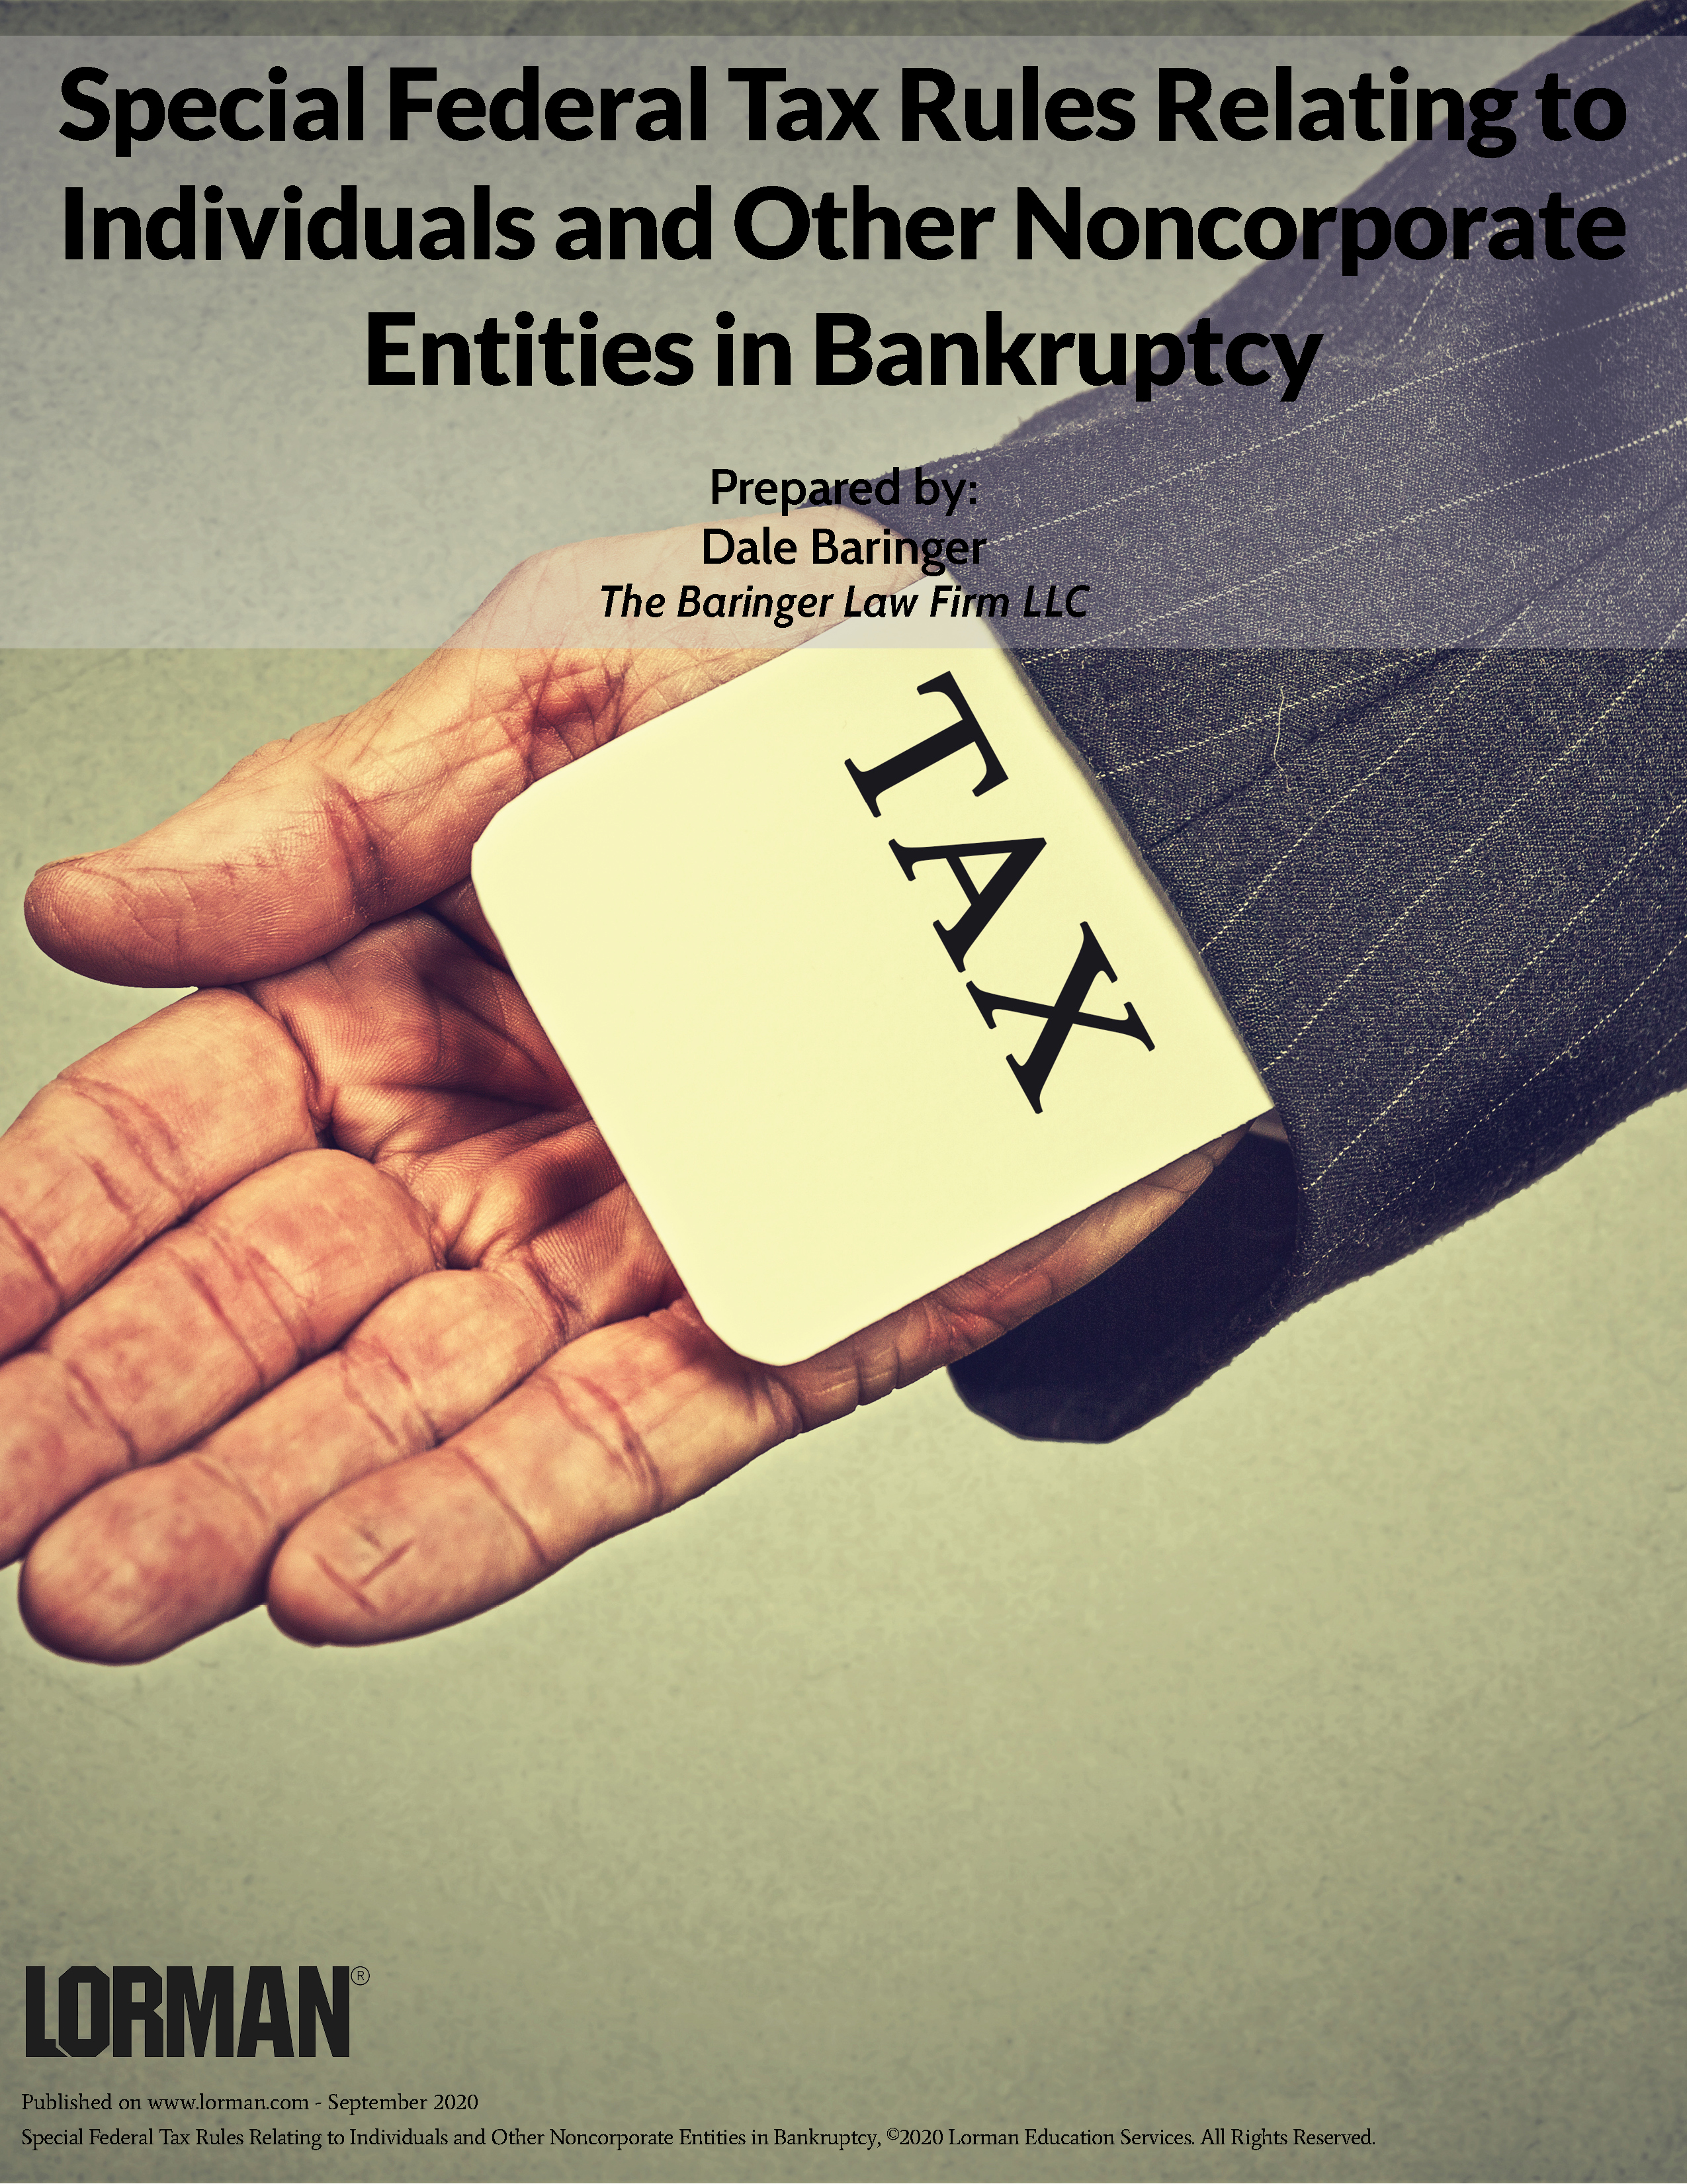 Special Federal Tax Rules Relating to Individuals and Other Noncorporate Entities in Bankruptcy